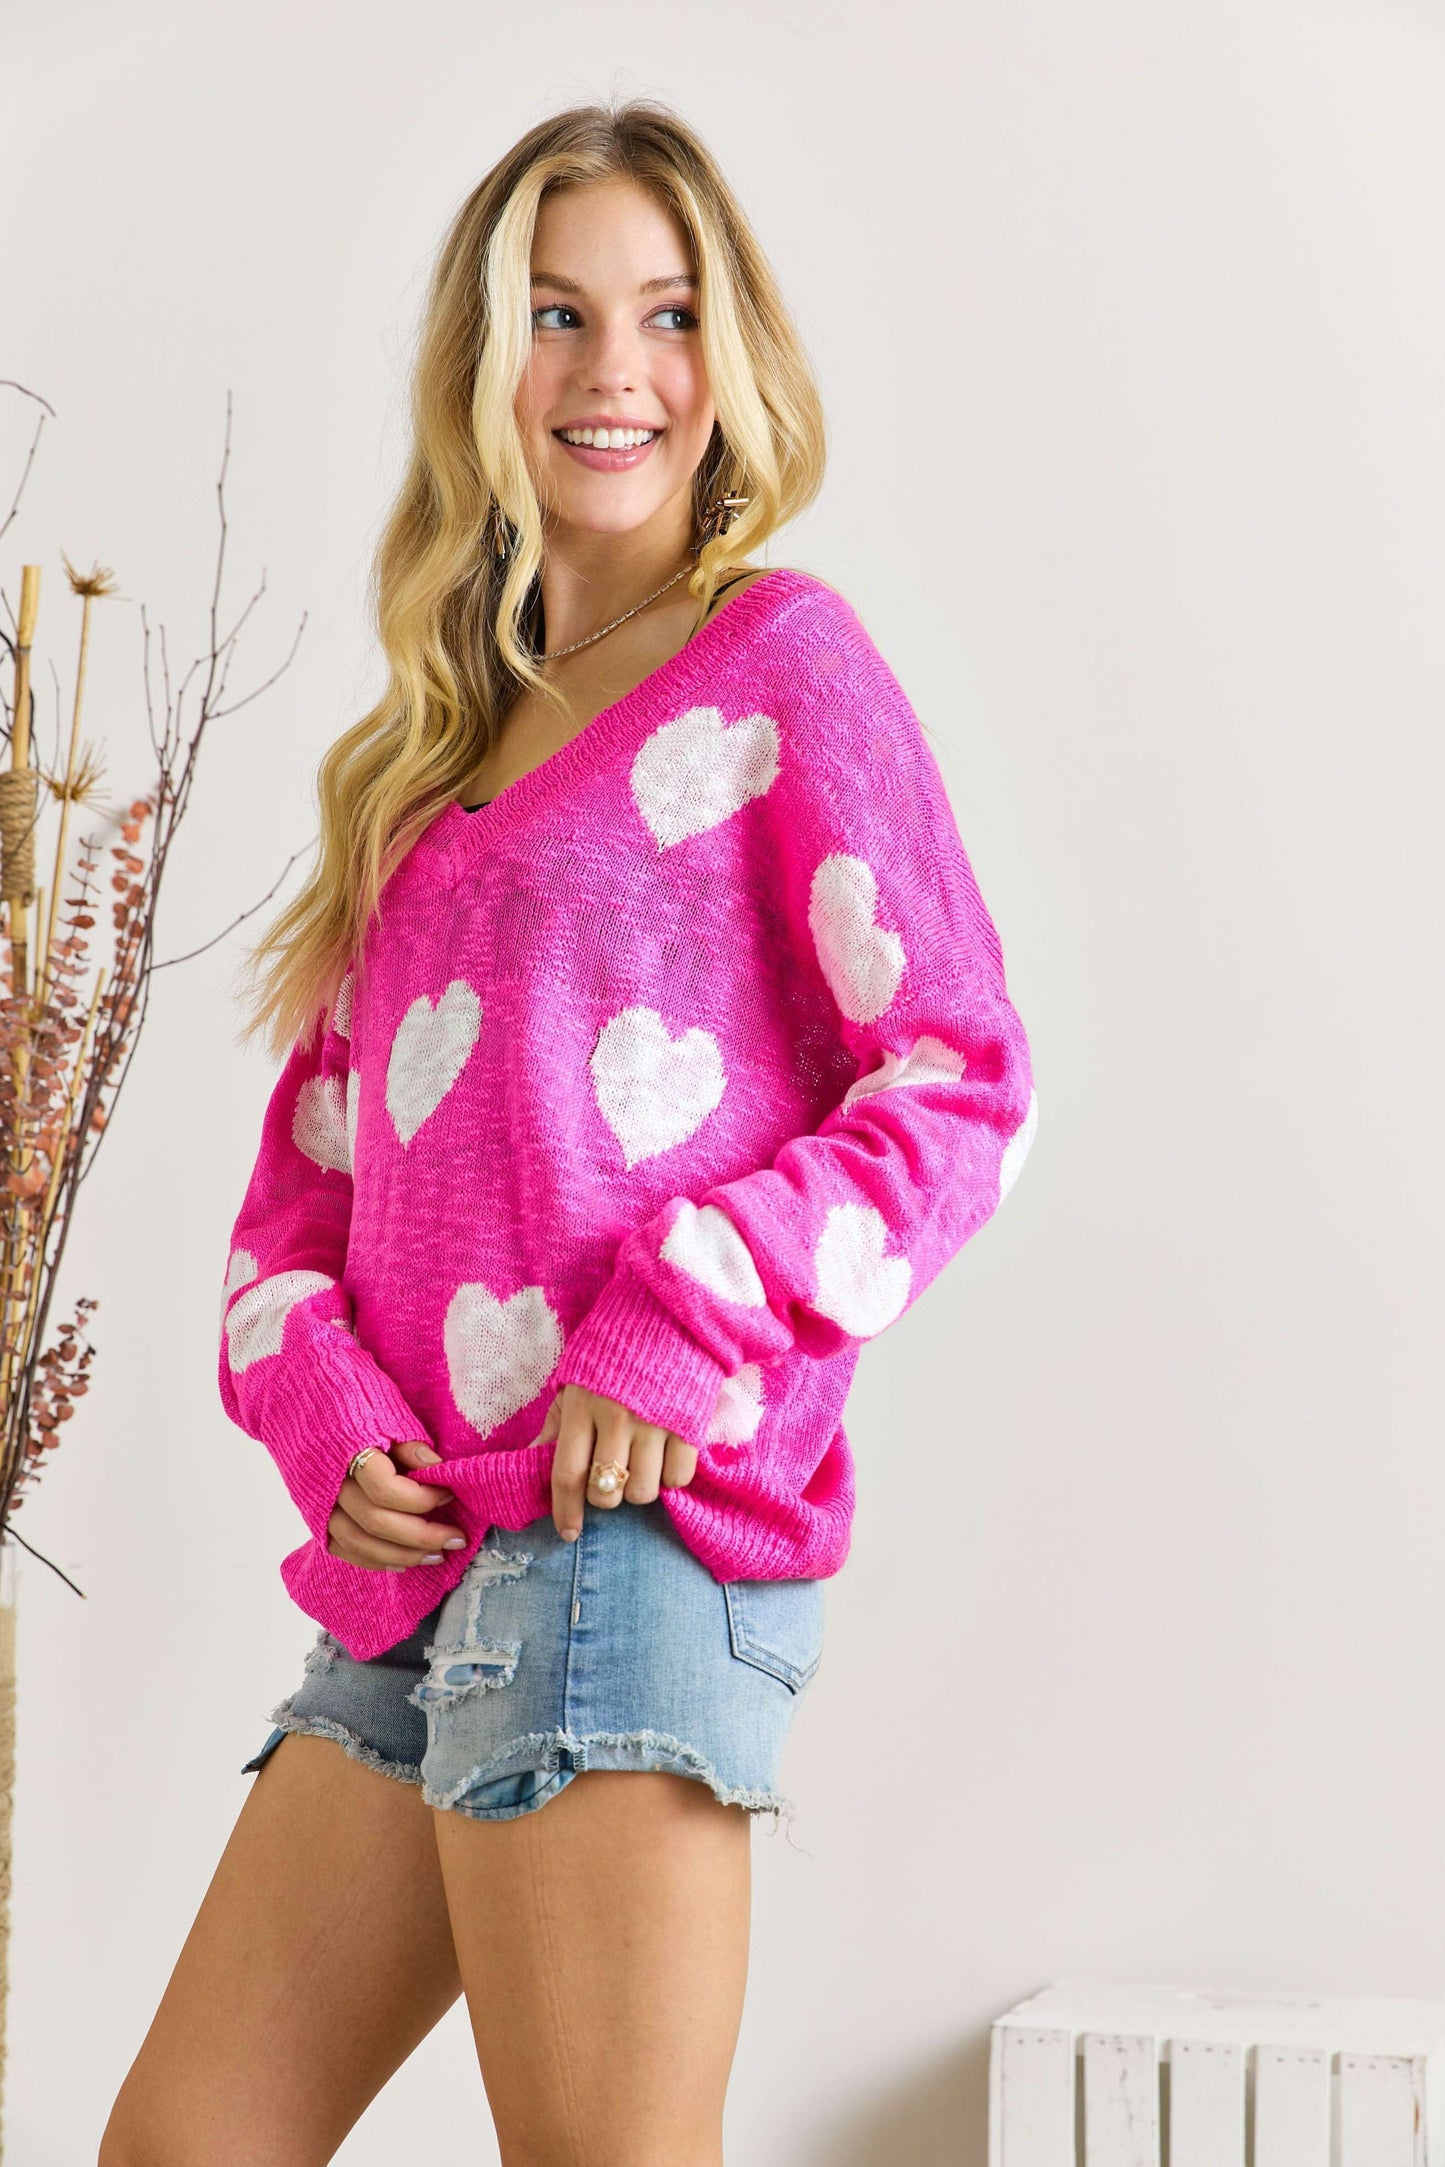 Adora Adora - Lovely Heart Sweater Top - Hot Pink available at The Good Life Boutique